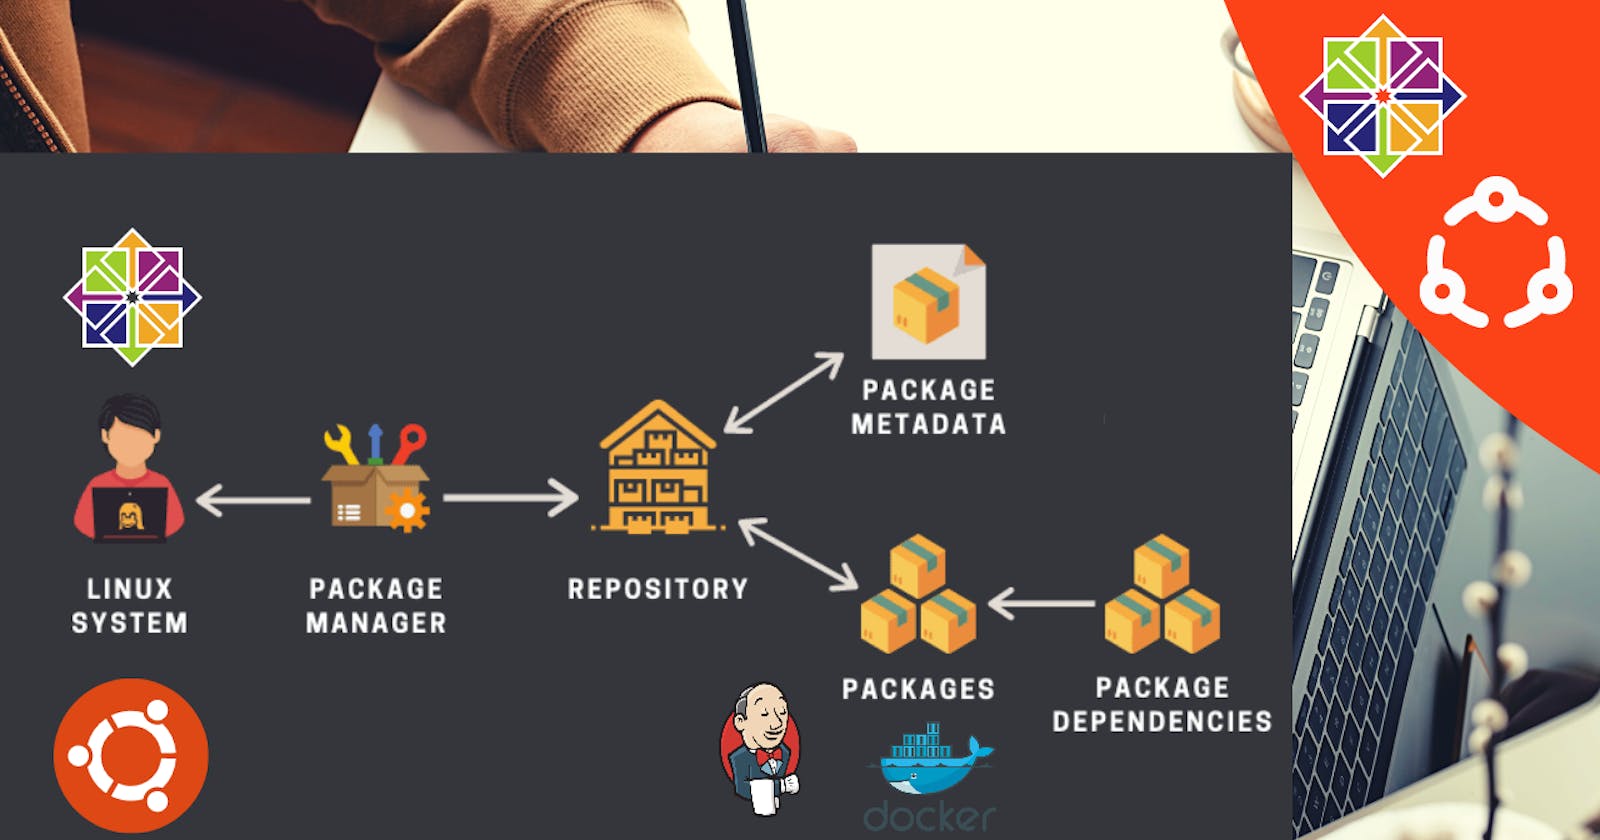 Package manager and systemctl